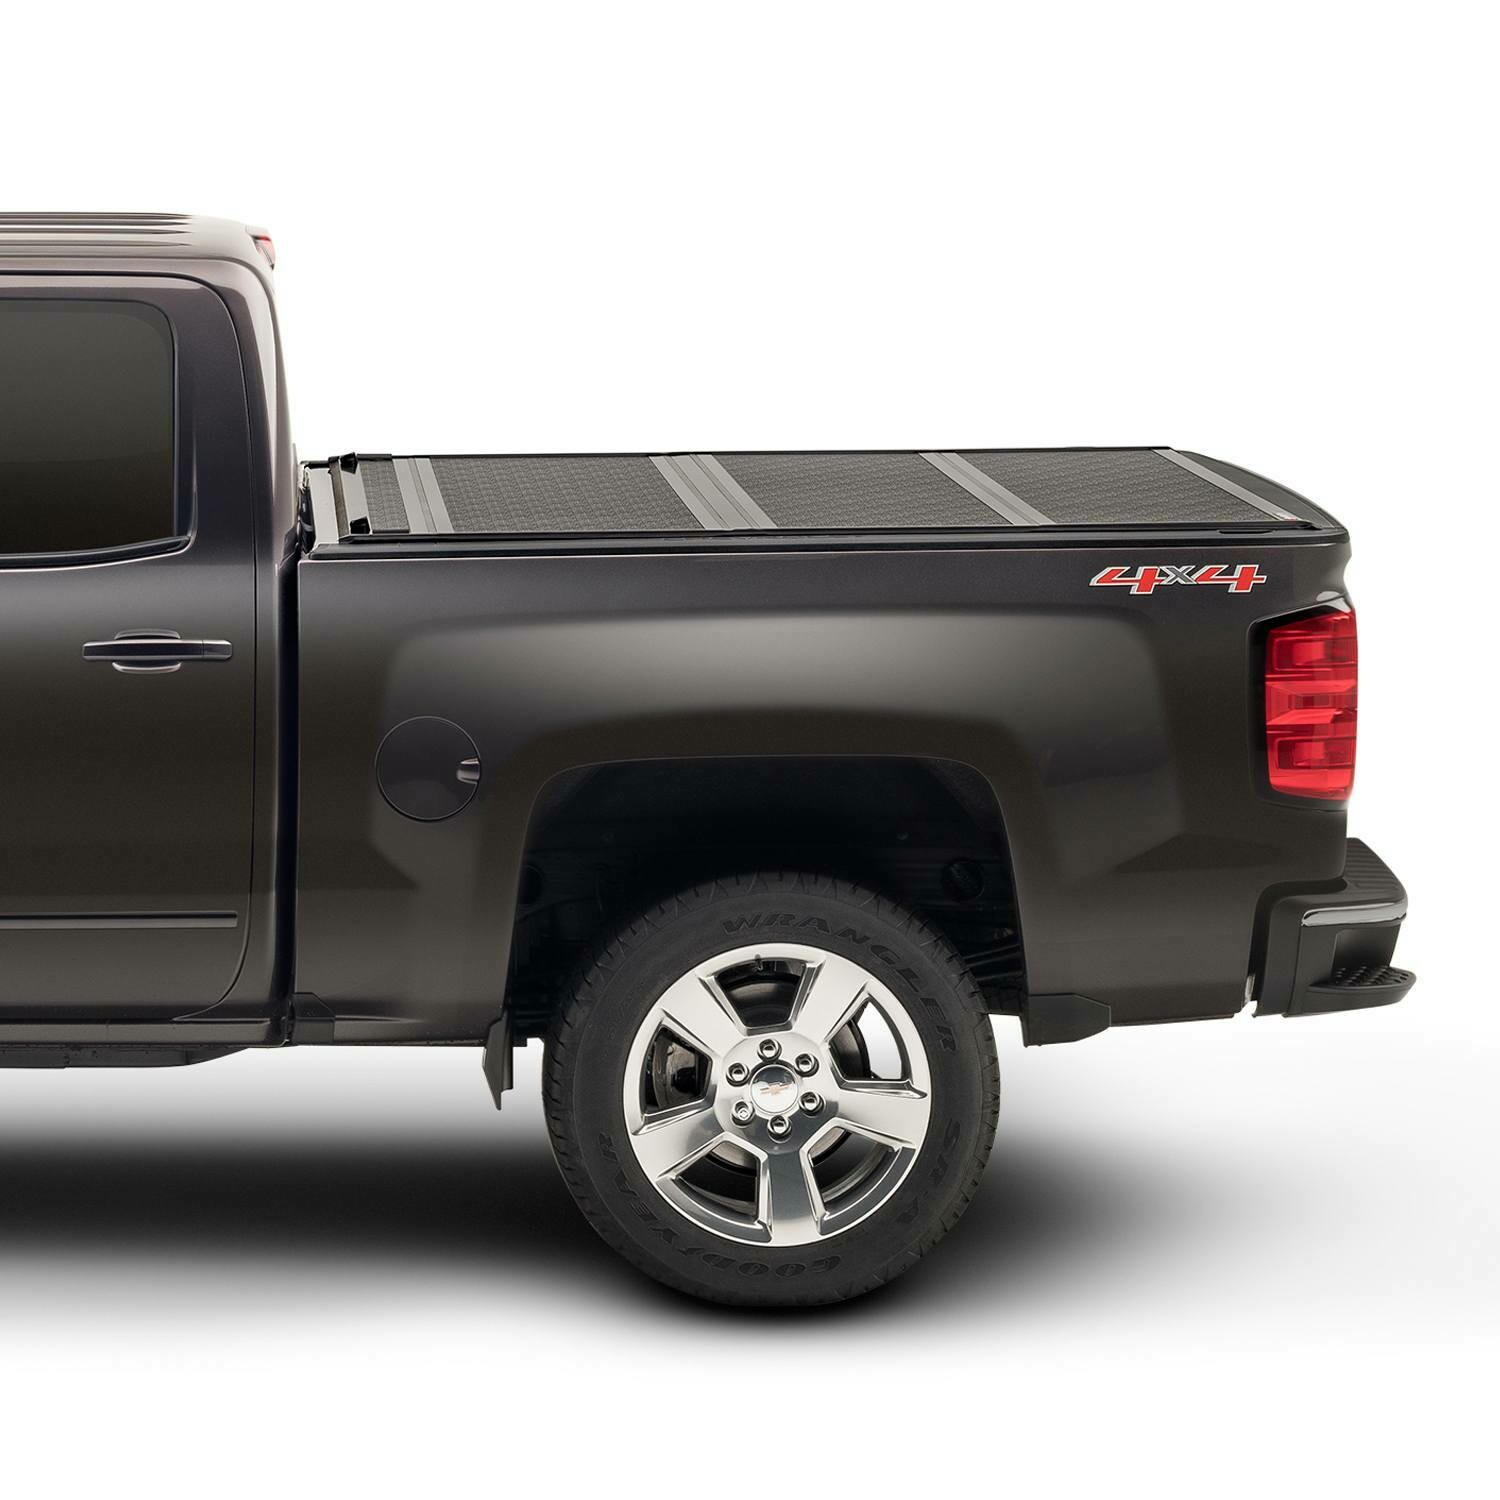 BAKFlip G2 Hard Folding Truck Bed Cover For 1988-2014 GMC Sierra & Chevy  Silverado 6' 6"Bed Size